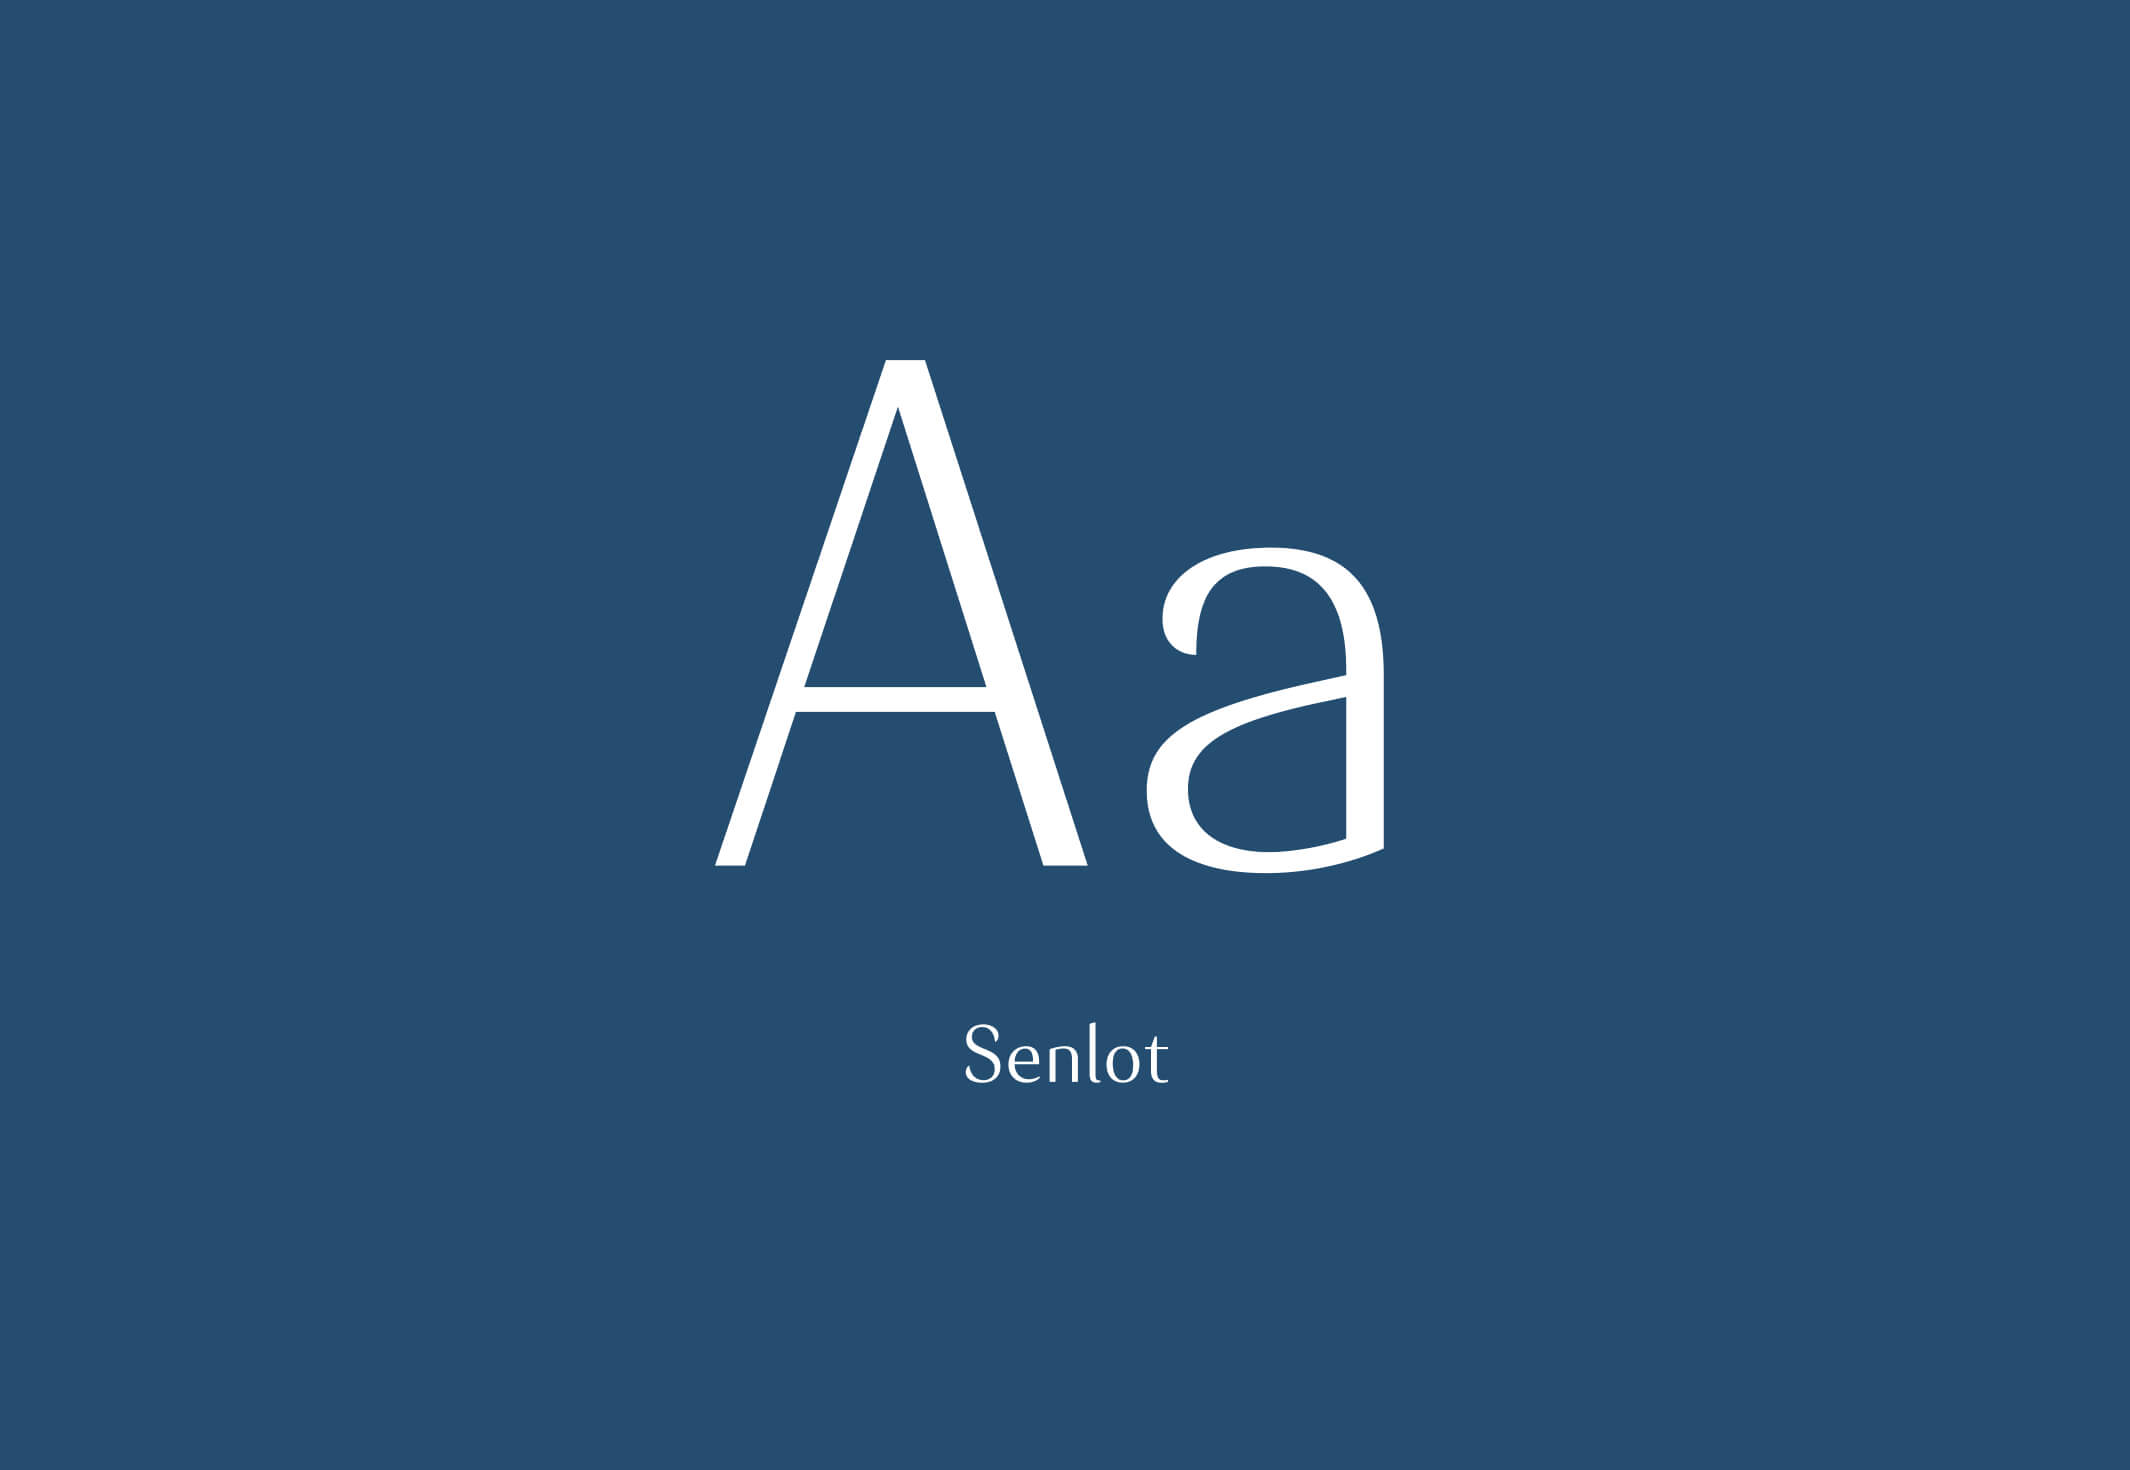 A letterform of the letter A for the font Senlot